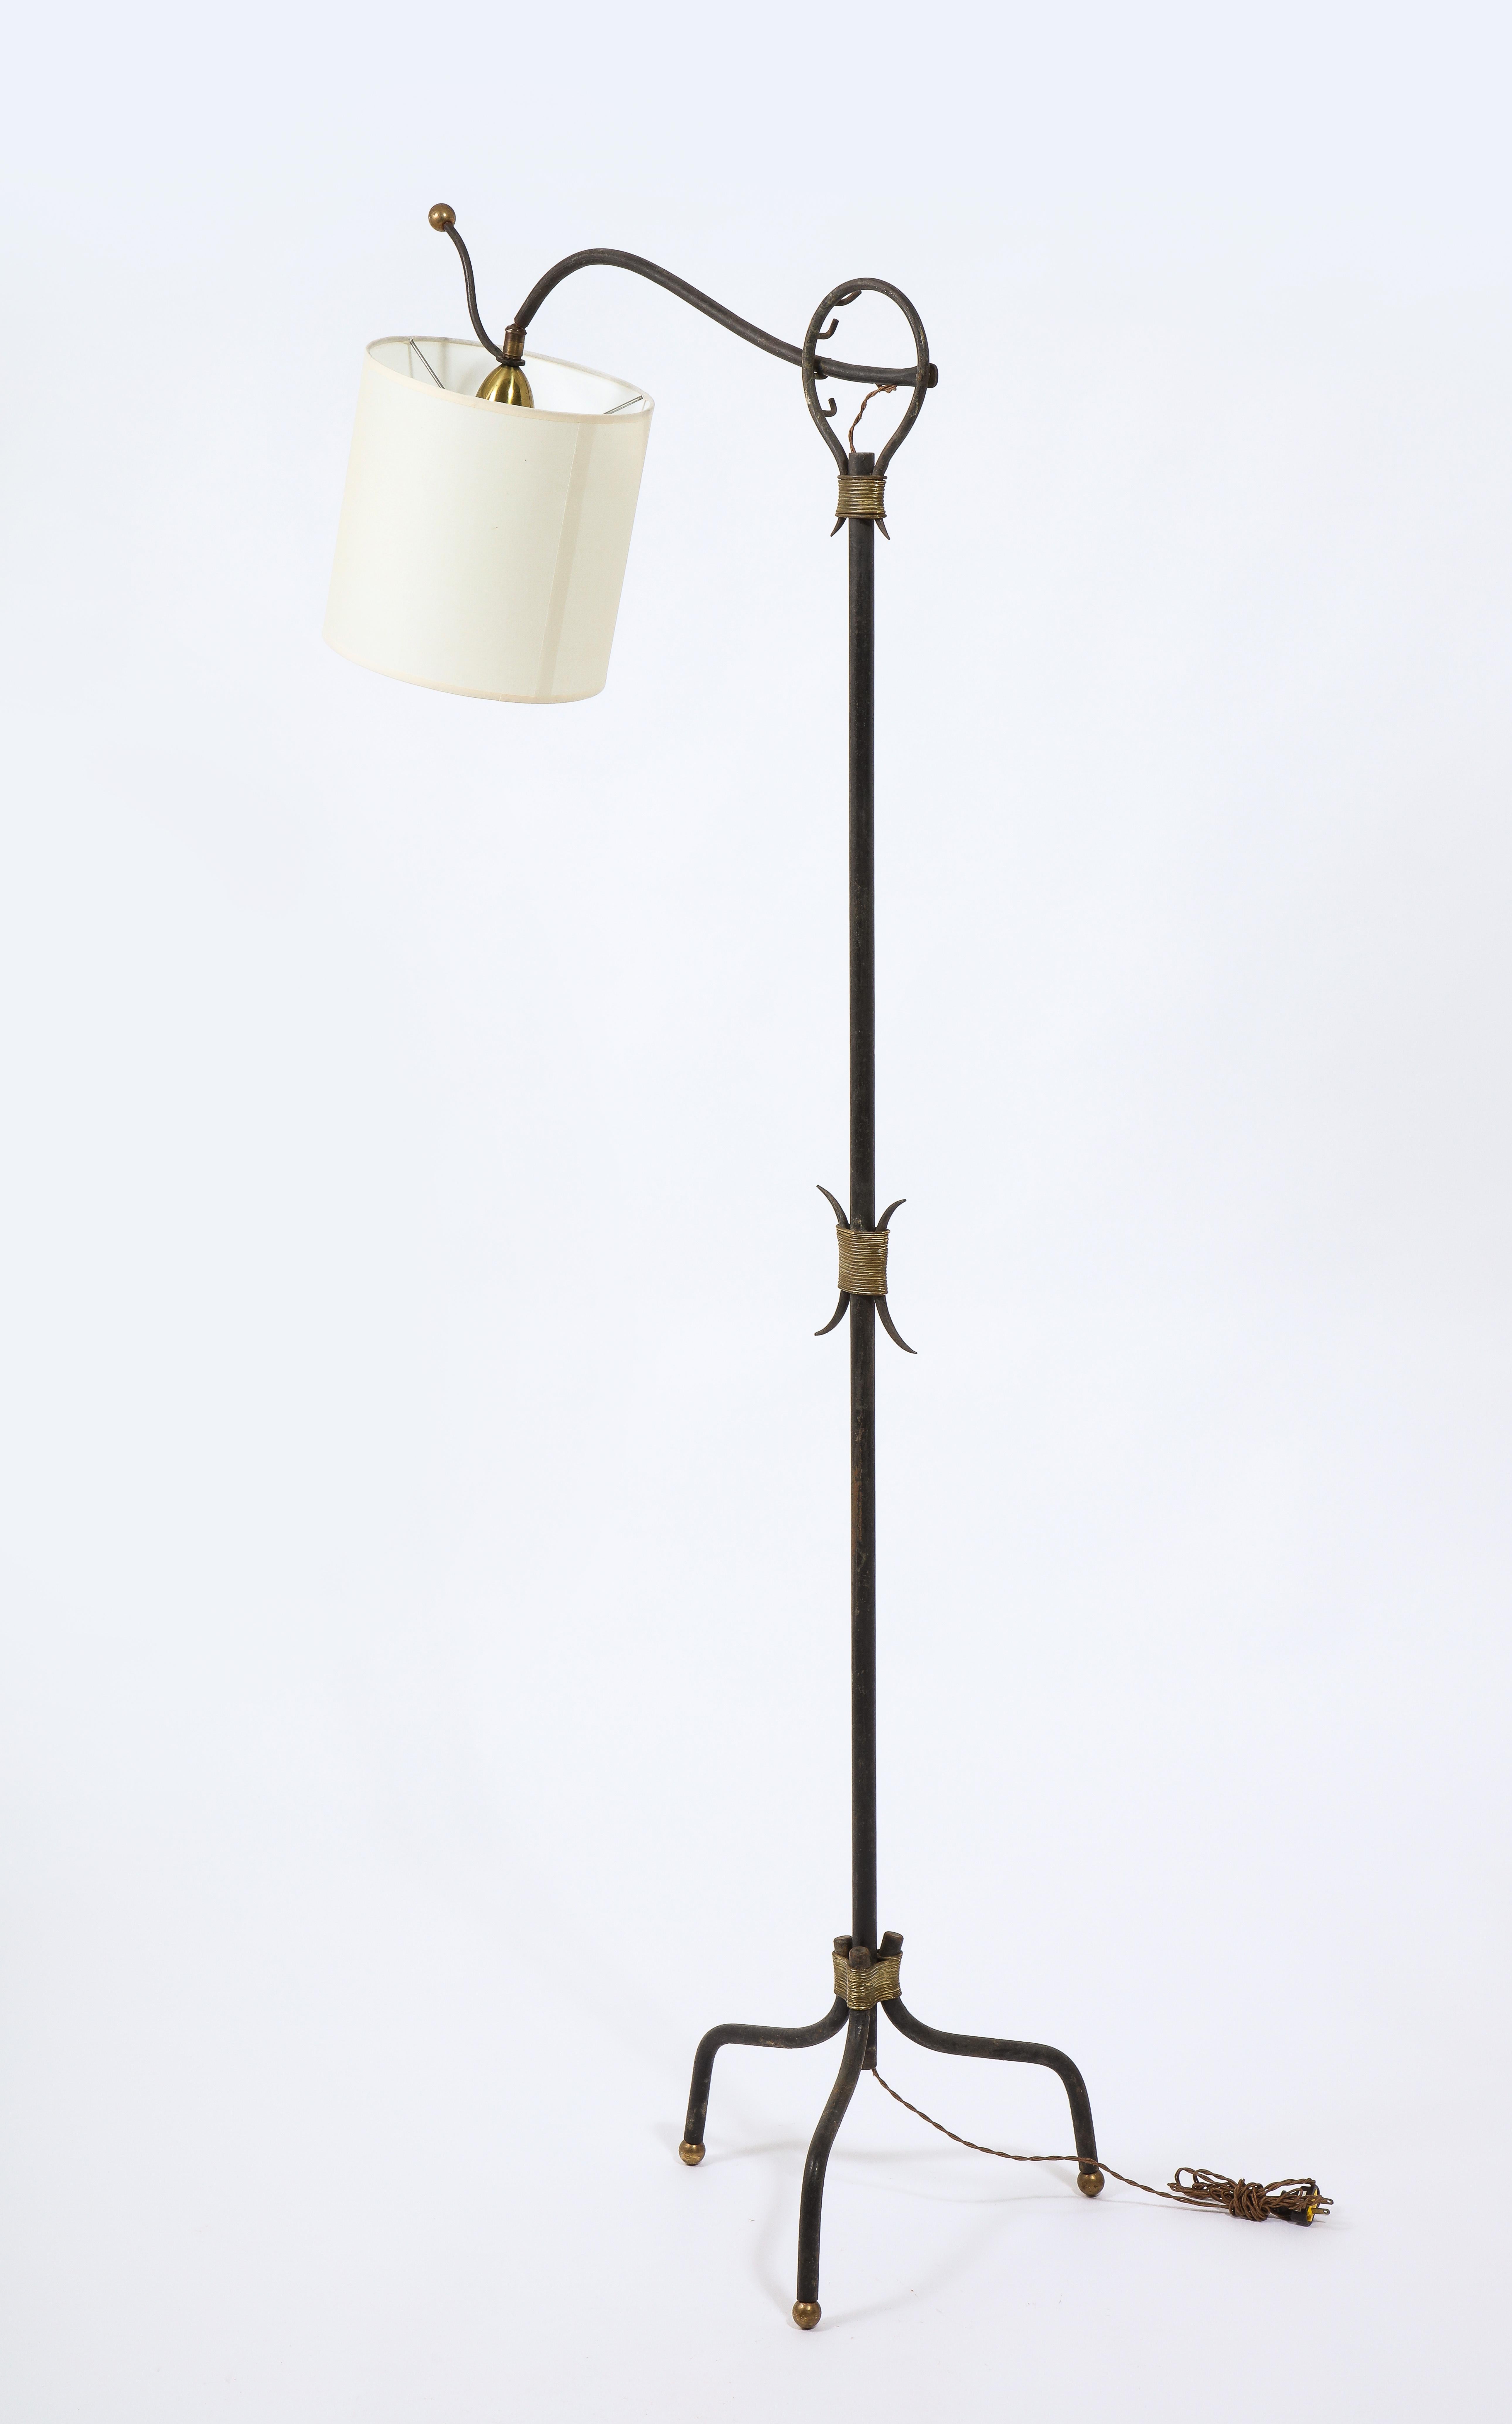 Adjustable Tripodal Cantilevered Wrought Iron & Brass Floor Lamp, France 1950's For Sale 13